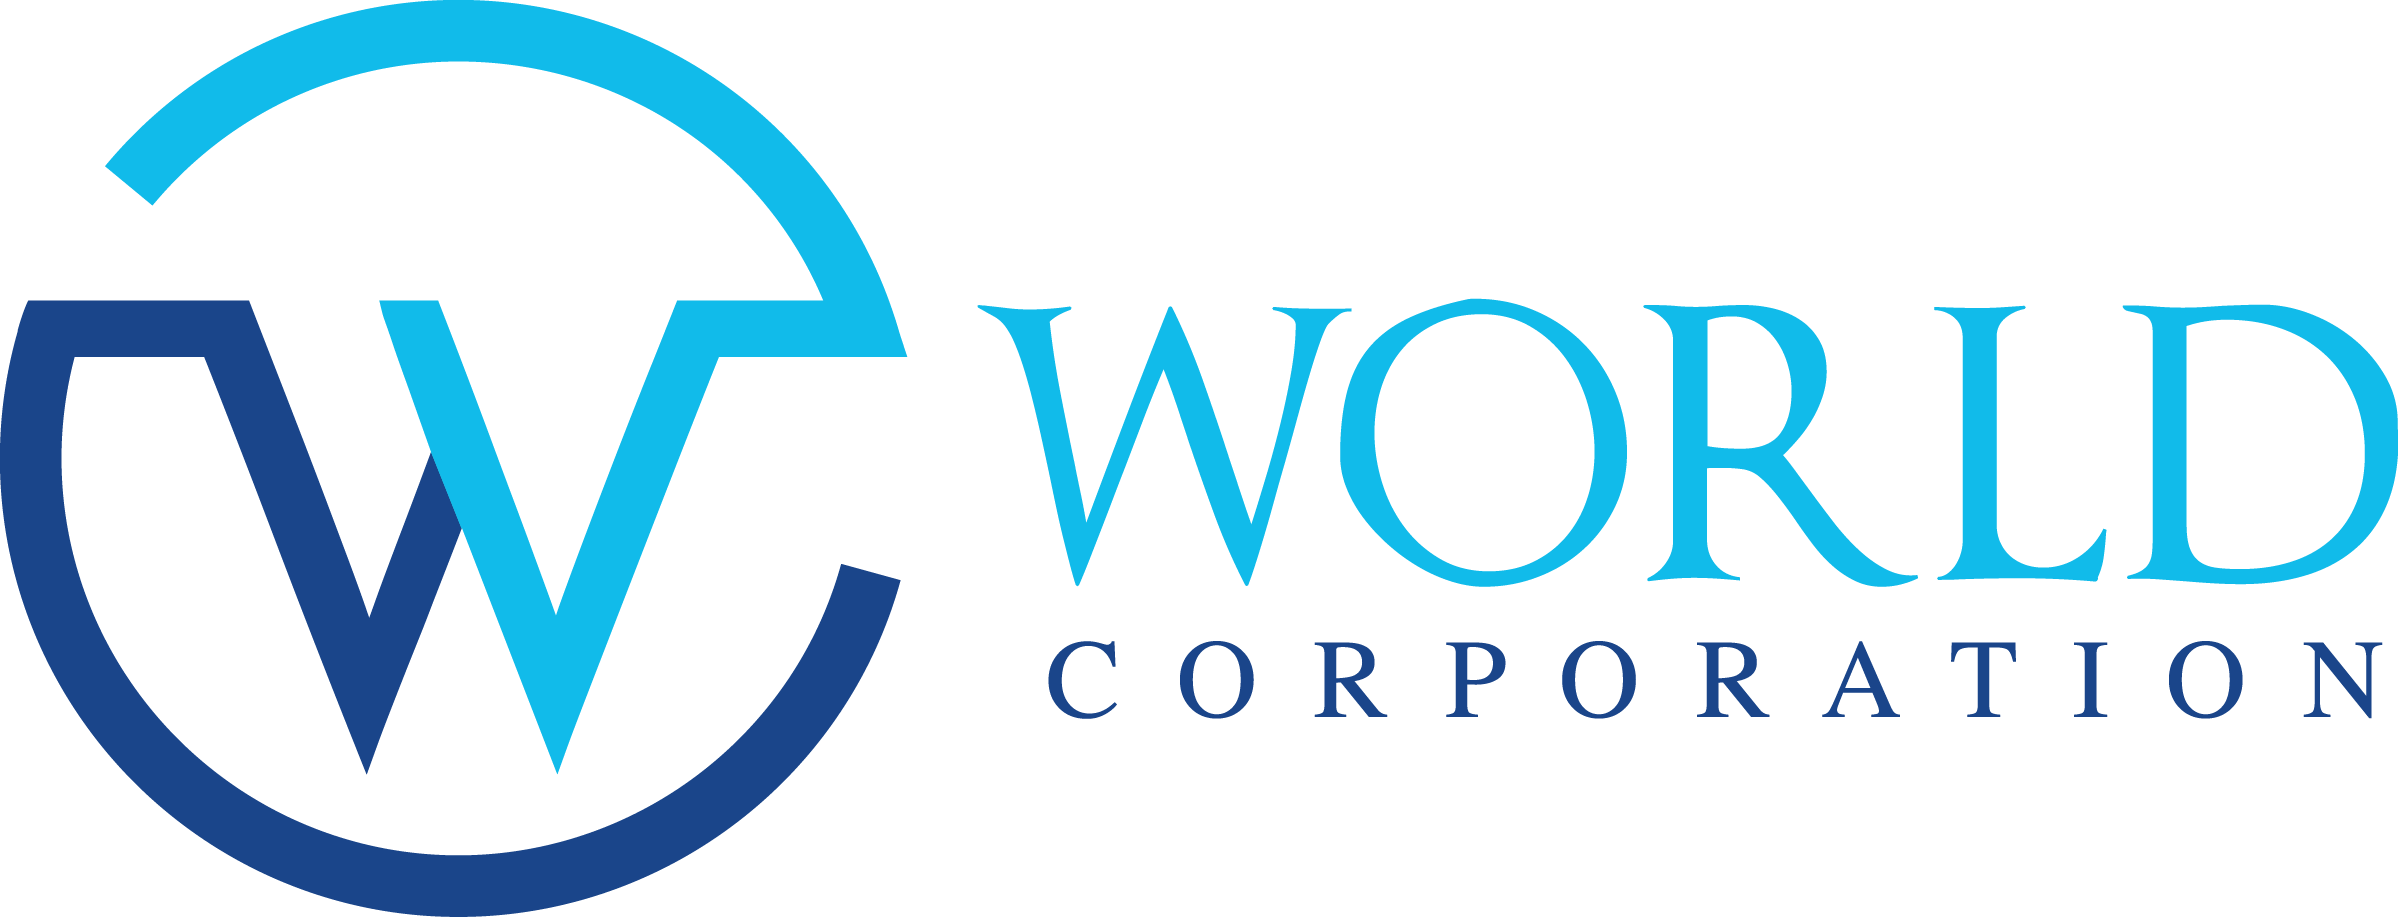 www.worldcorp.co.th